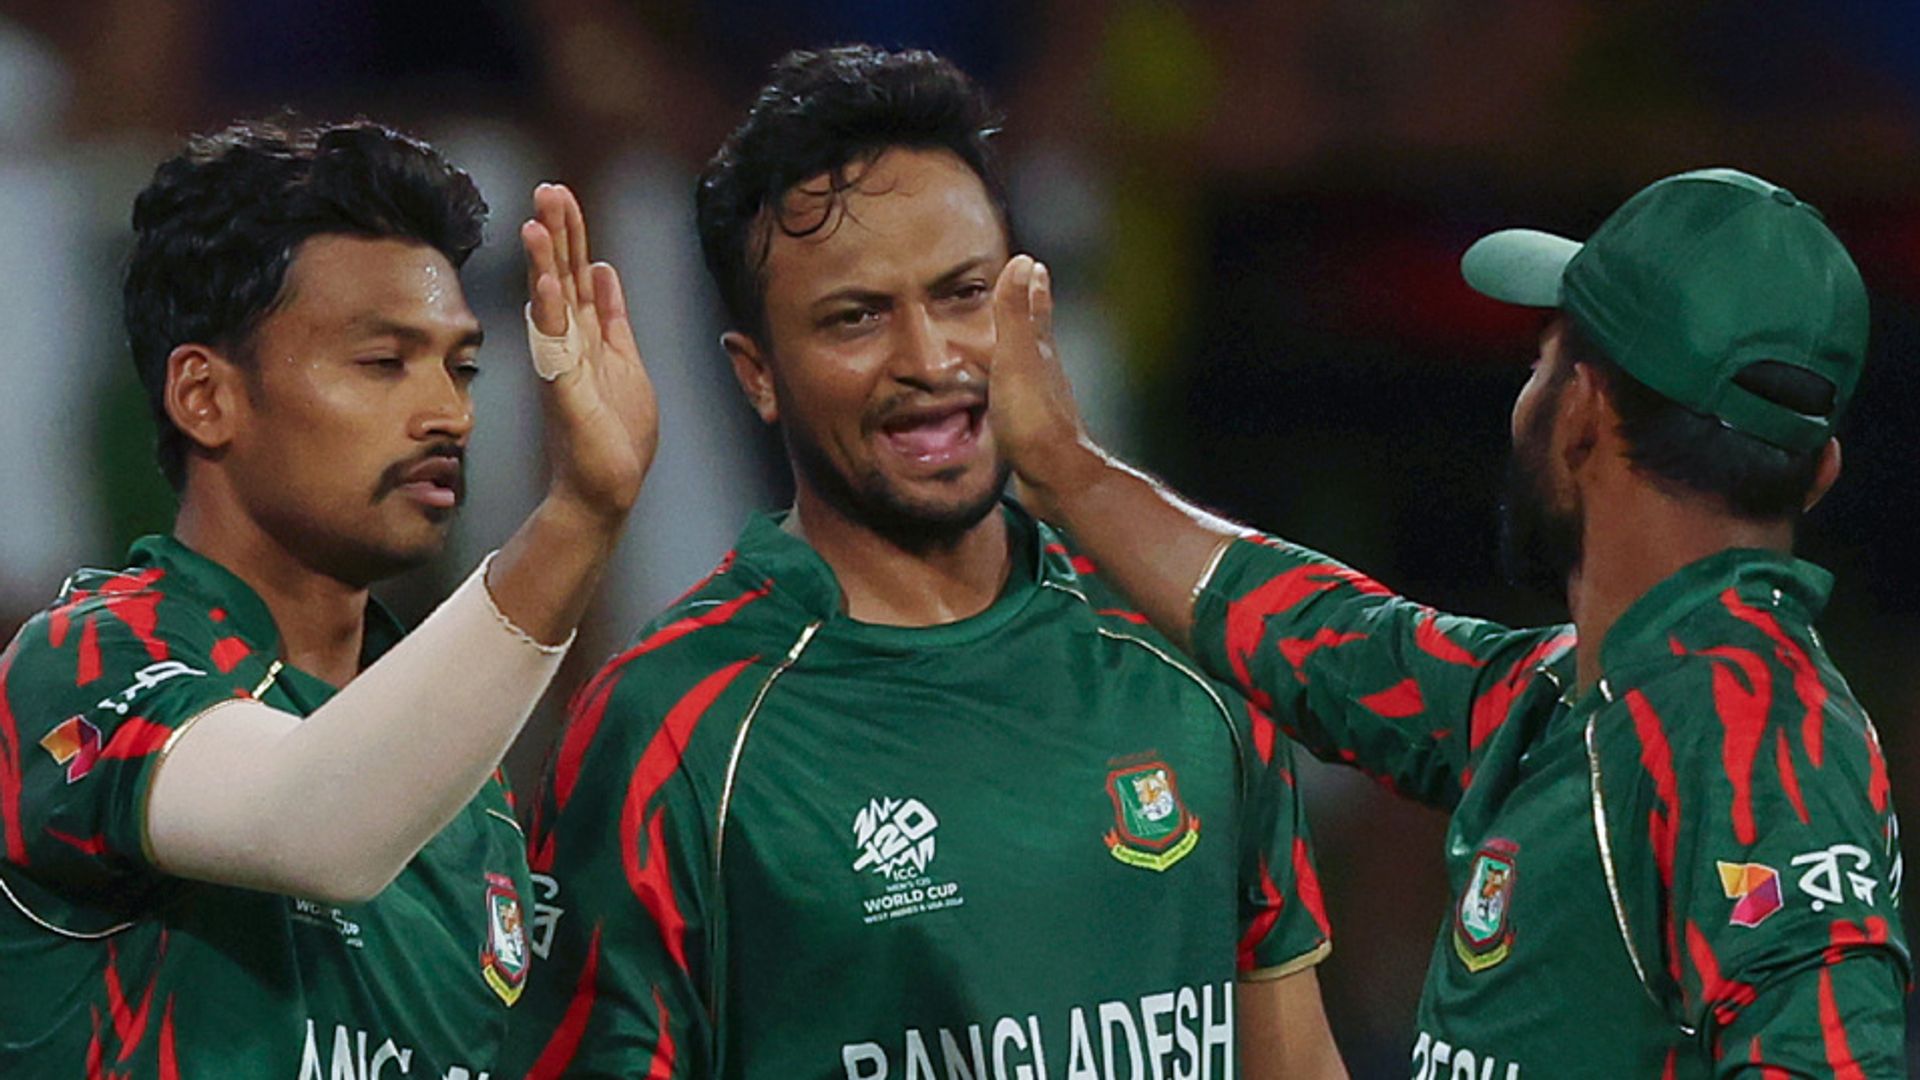 Bangladesh beat Nepal to seal final Super 8s place ahead of Netherlands